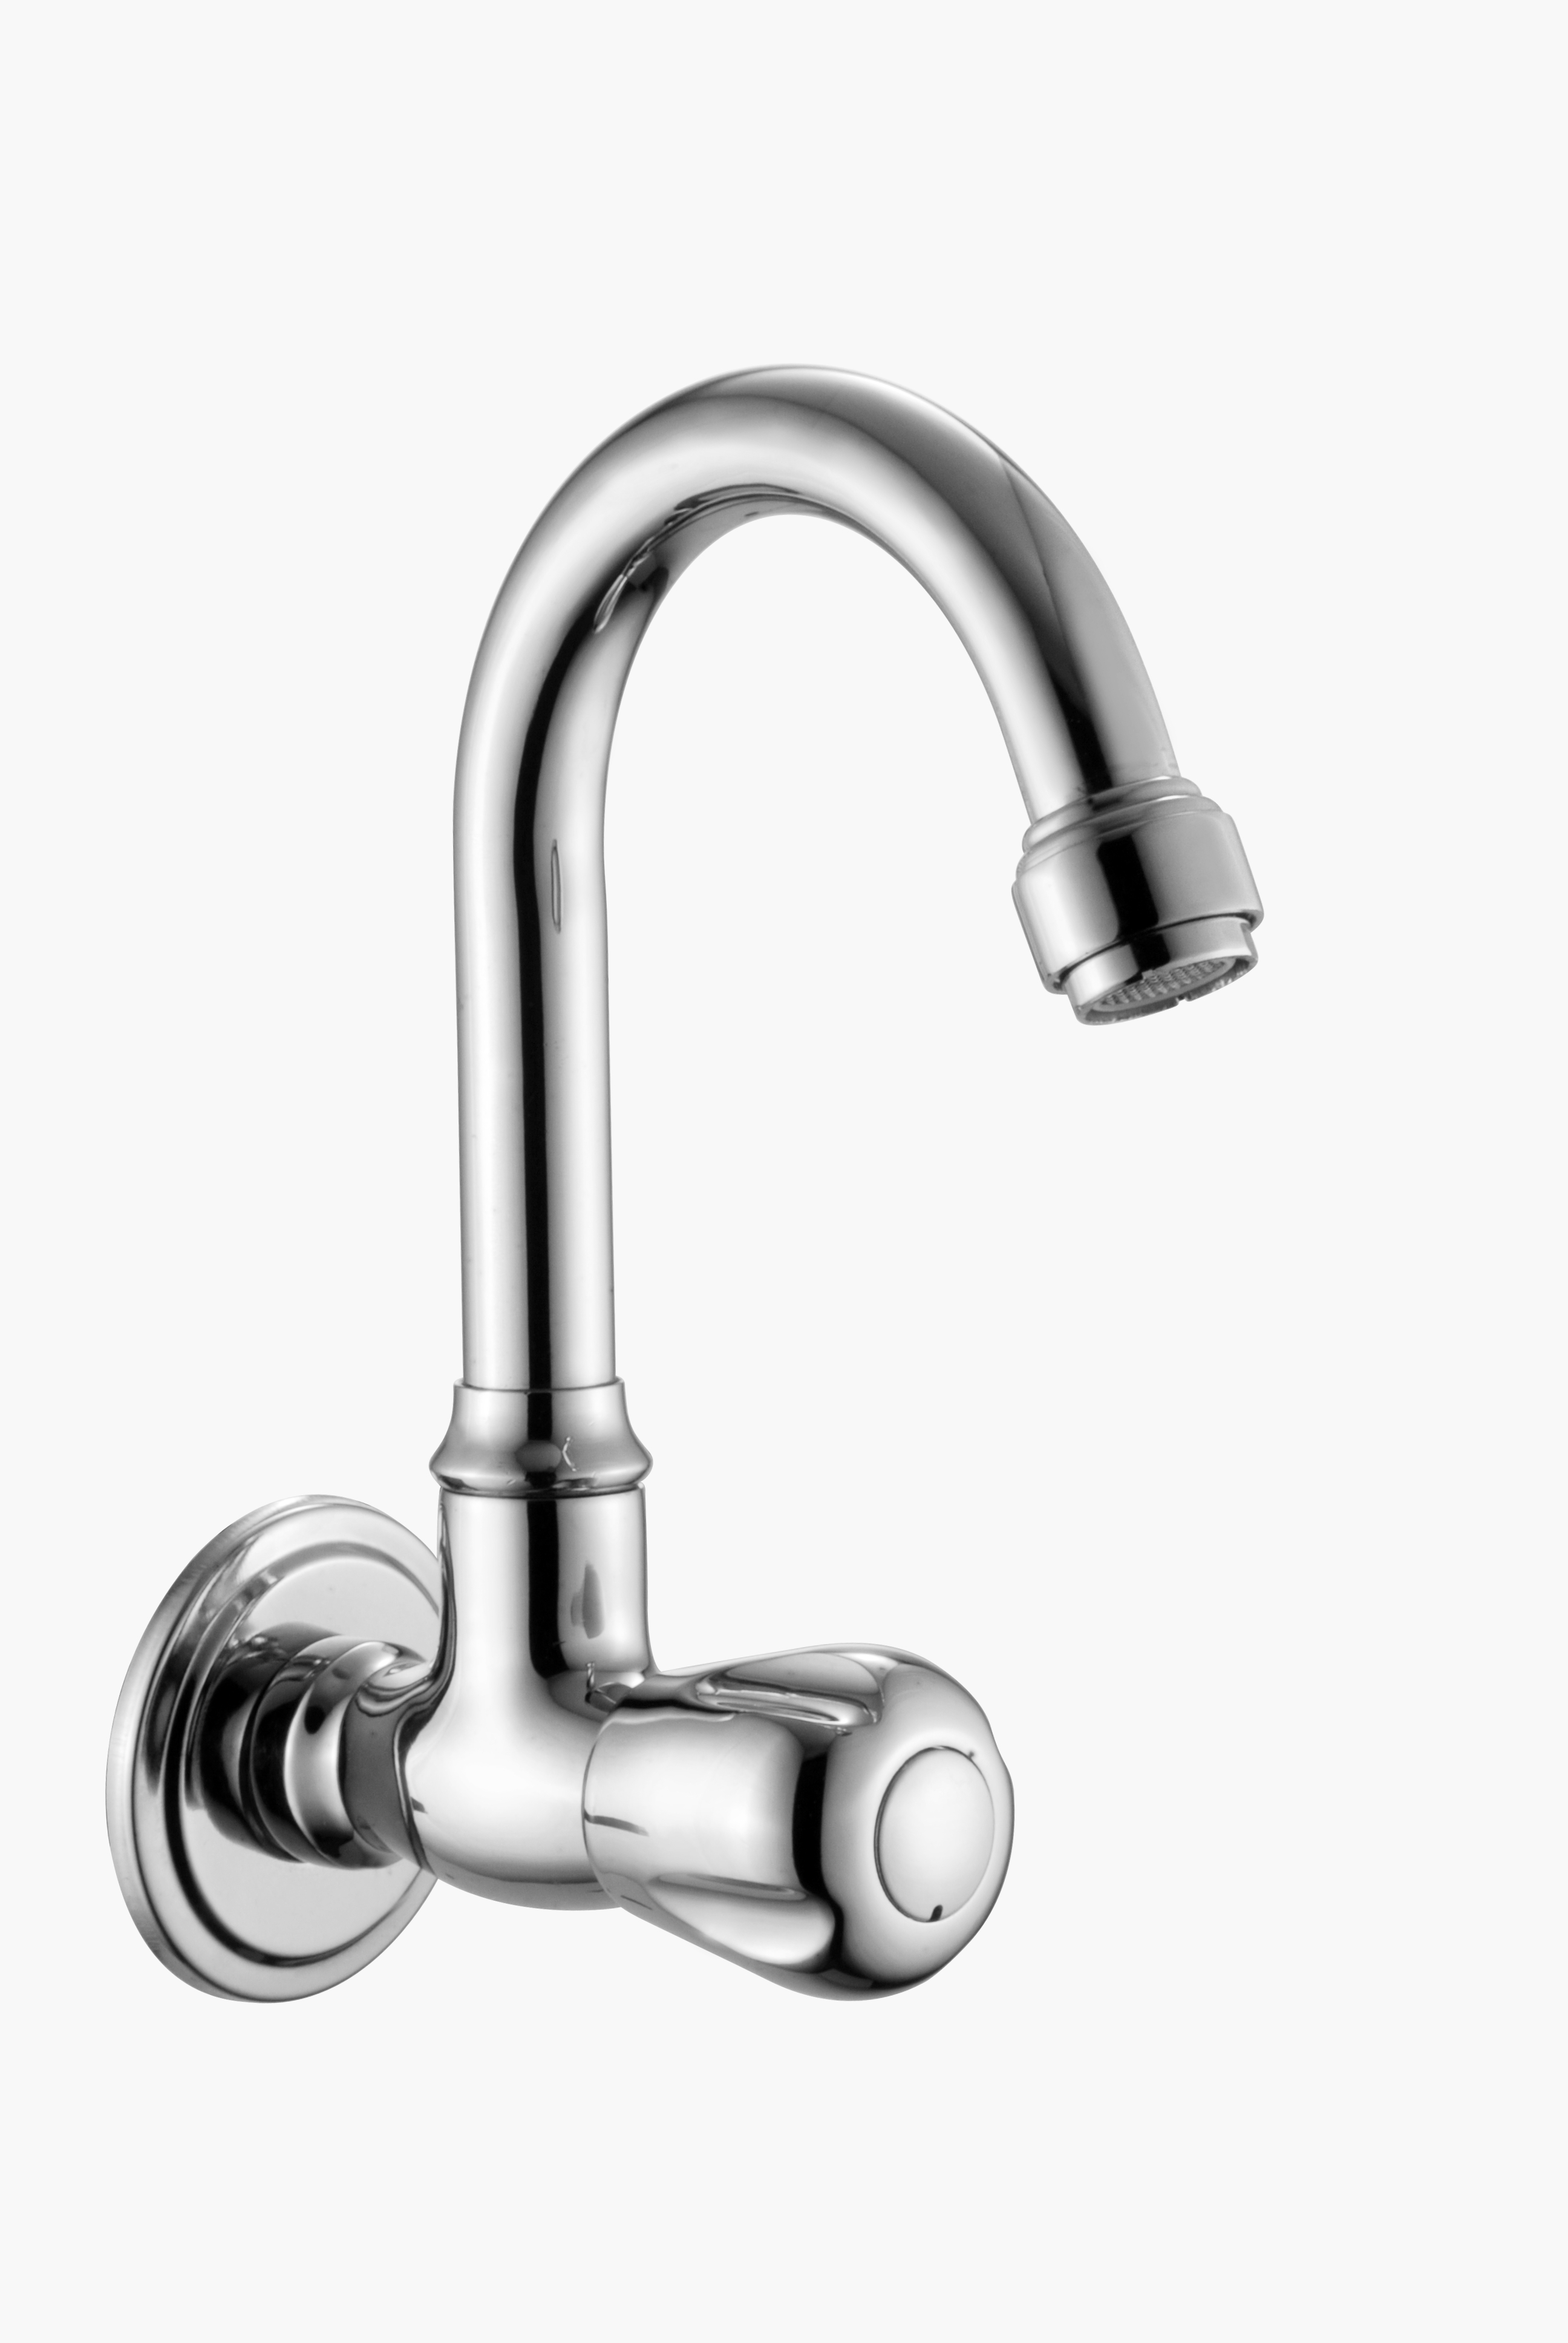 Buy Marine 9 Inch Economy Brass Sink Faucet Online At Best Price